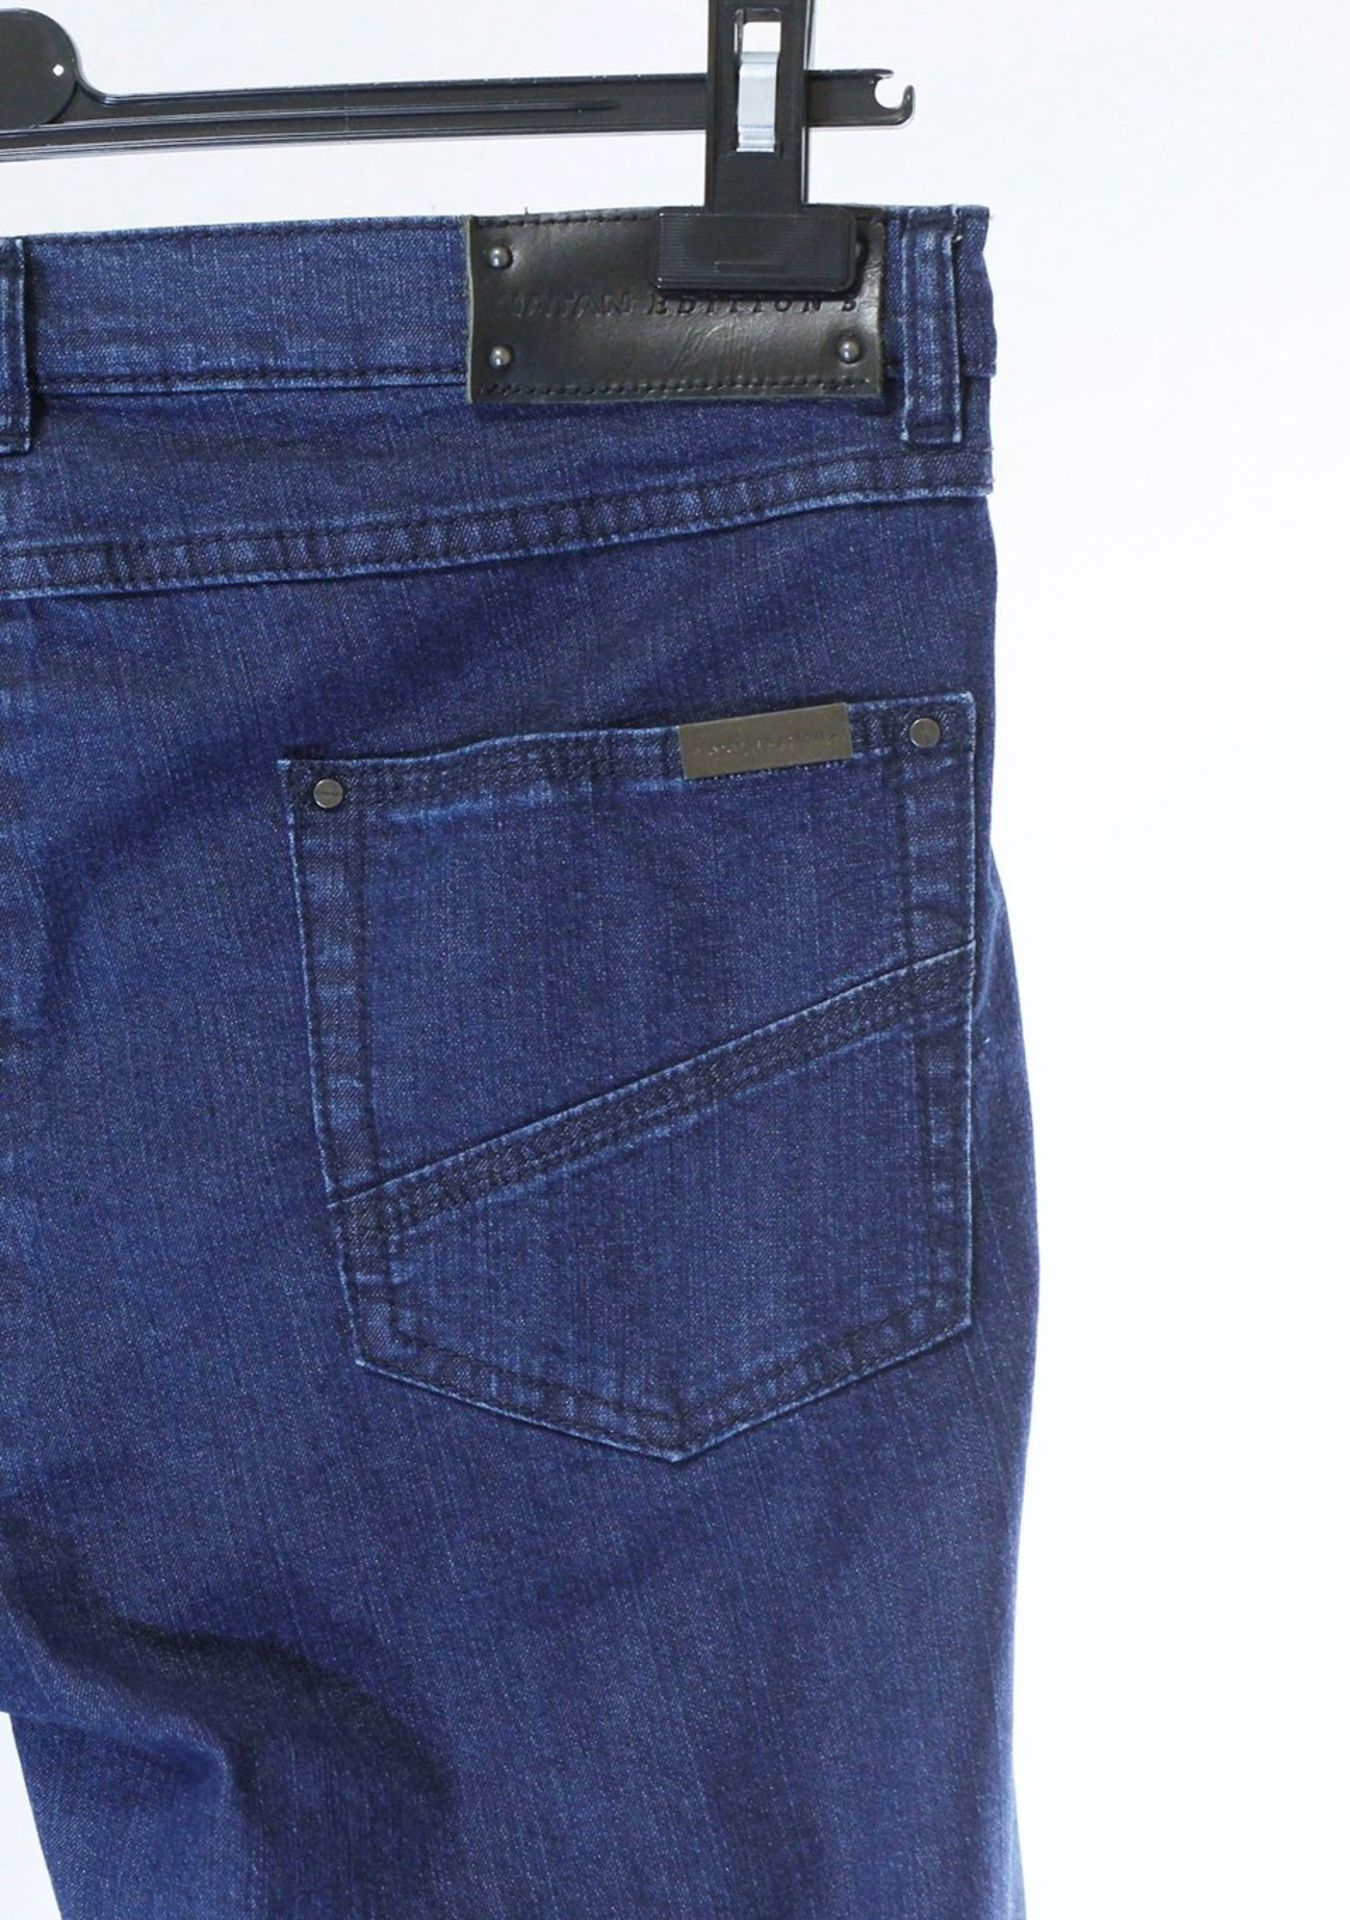 1 x Natan Denim Jeans - Size: 31 Waist - Material: 90% Cotton, 8% Polyester, 2% Elastane - From a - Image 5 of 5